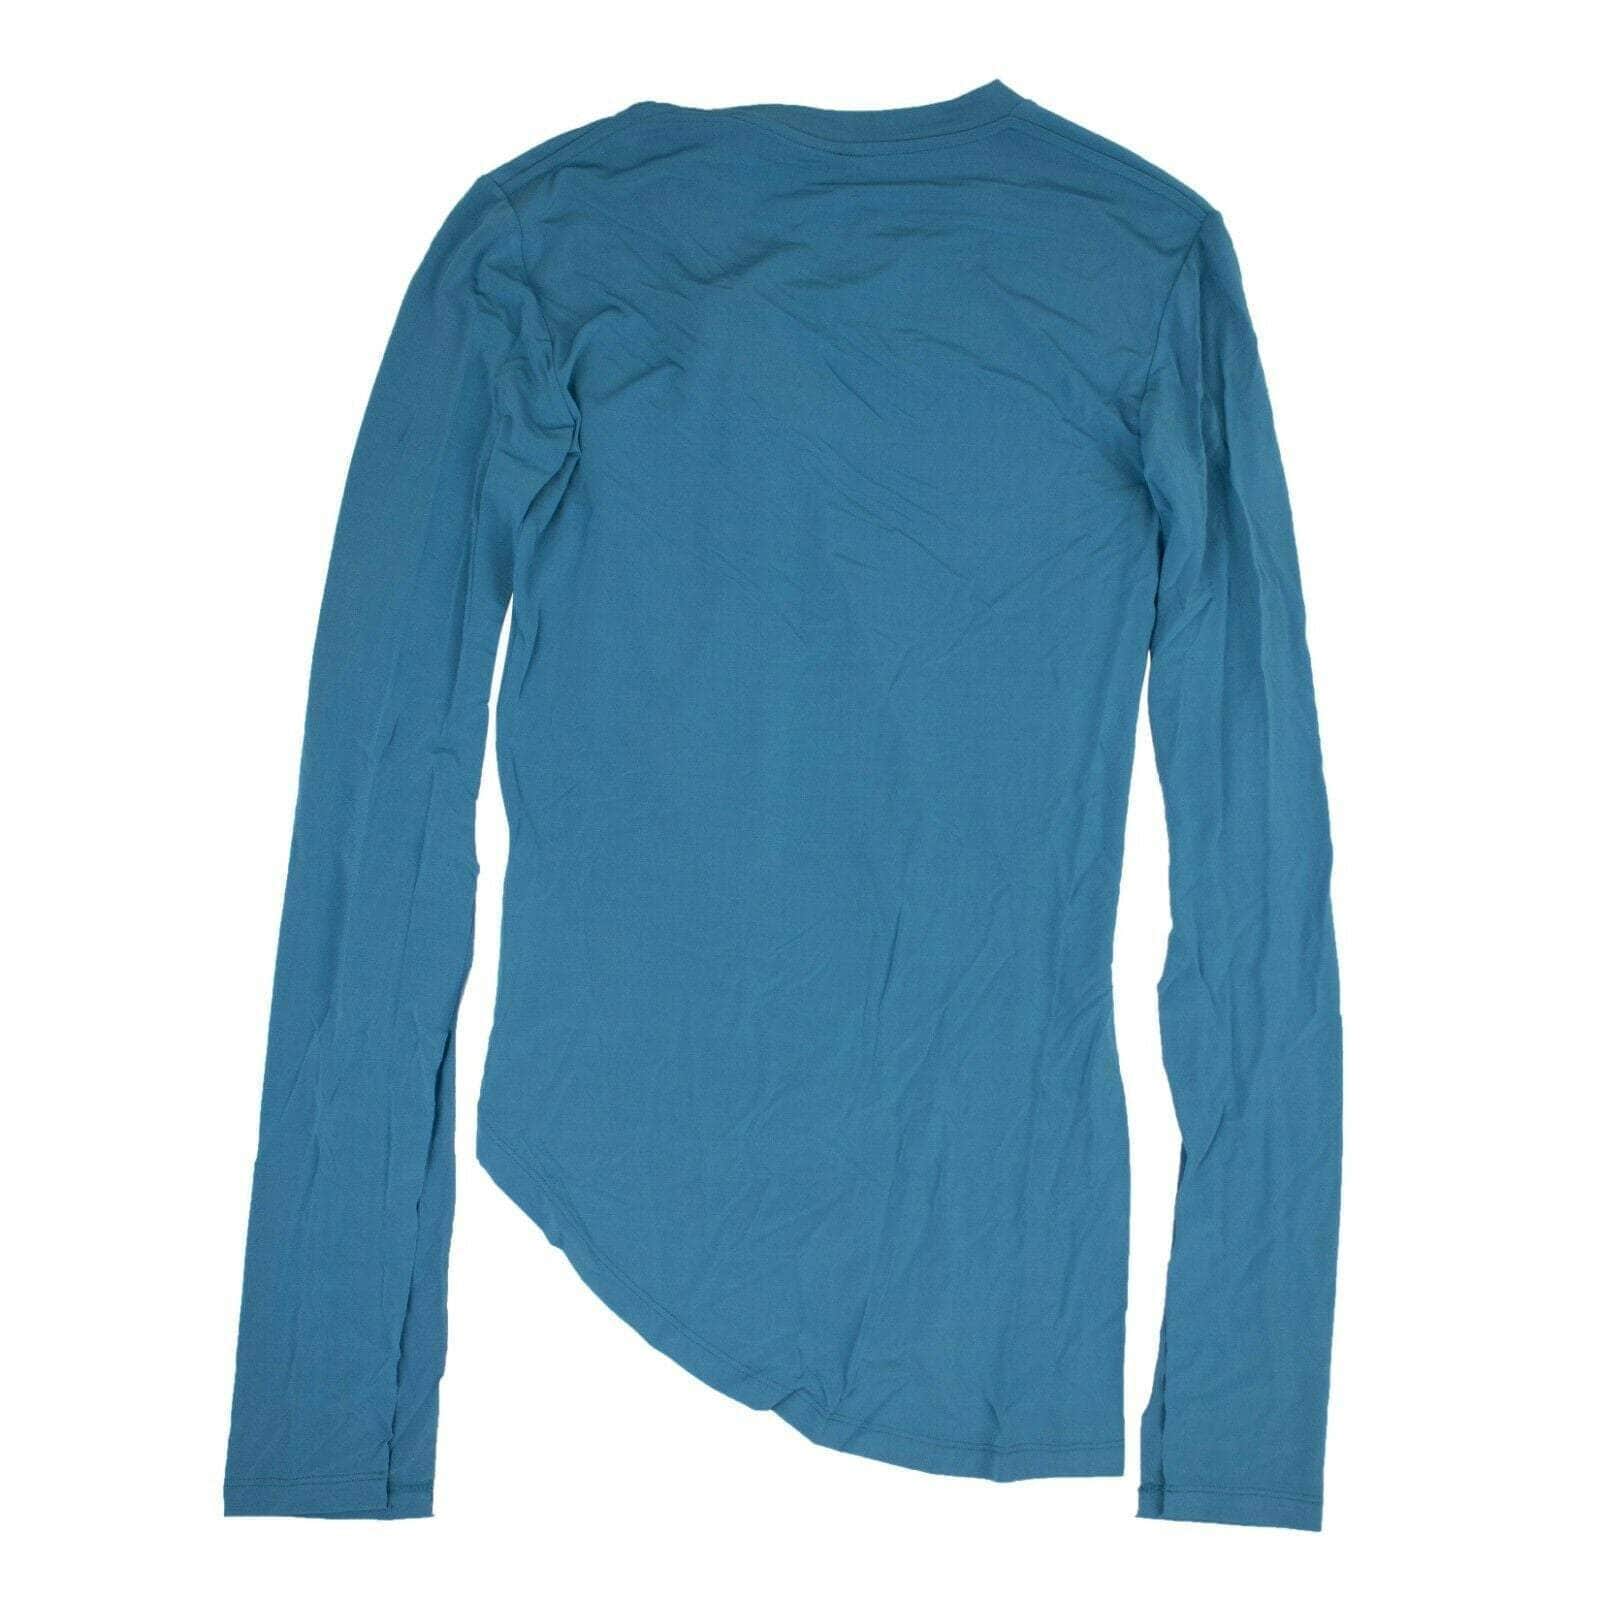 Unravel Project channelenable-all, chicmi, couponcollection, gender-womens, main-clothing, size-s, under-250, unravel-project S Blue Twist Top 82NGG-UN-1062/S 82NGG-UN-1062/S